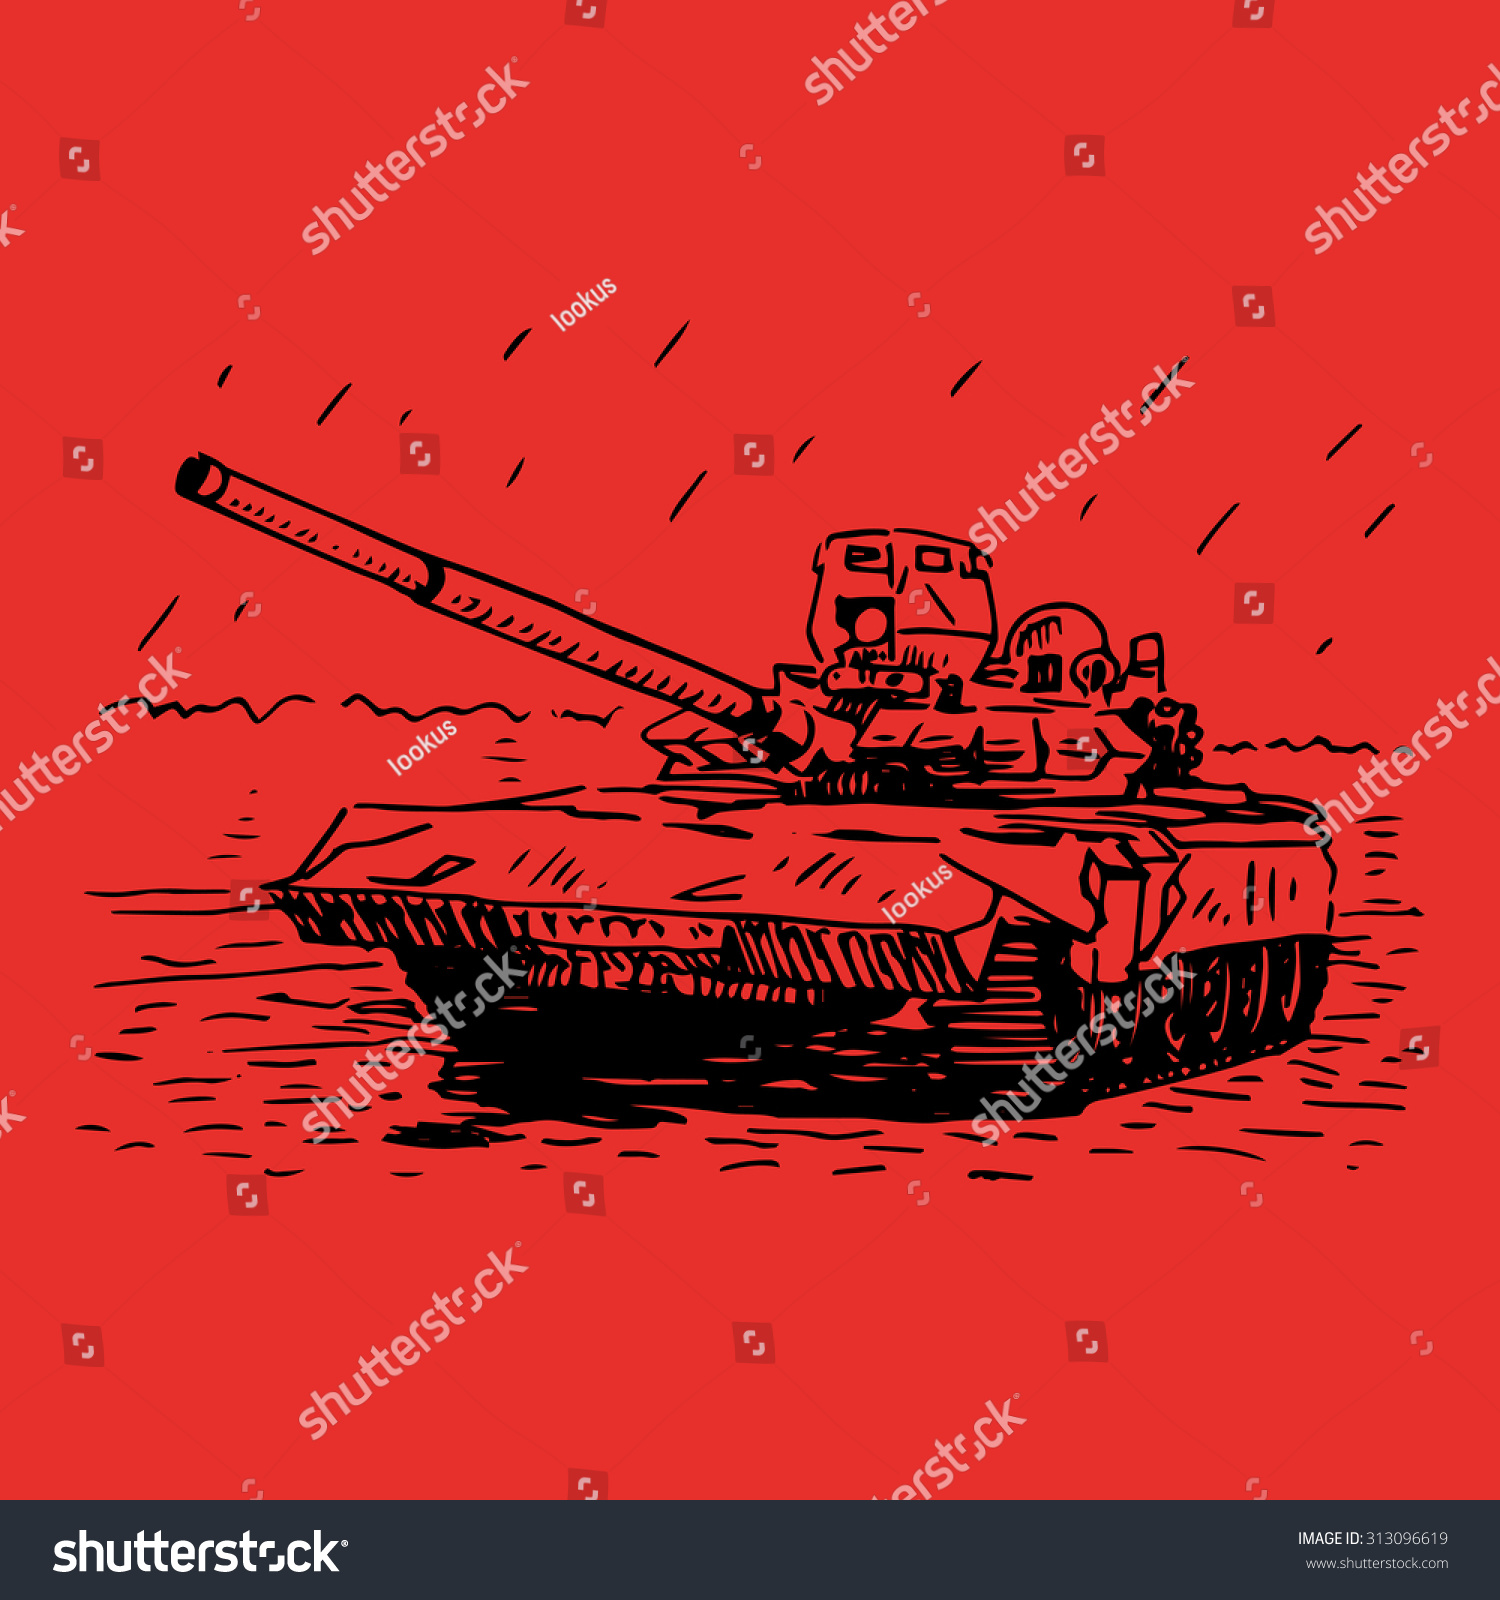 Russian tank T-72. Vector freehand sketch. #313096619